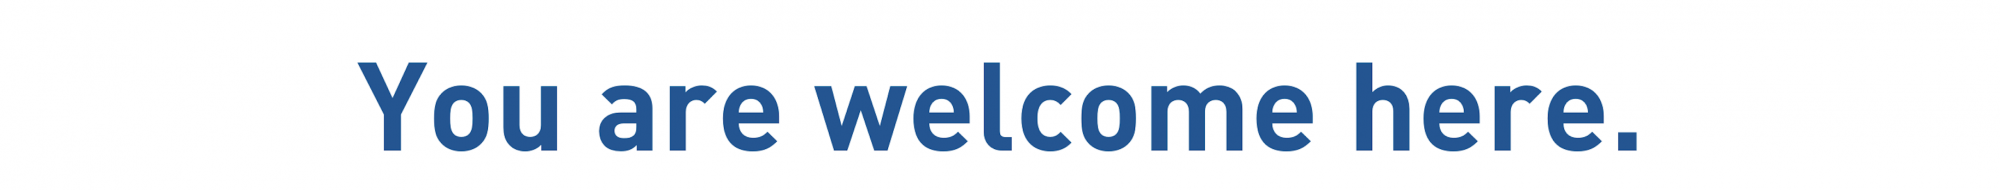 White image with blue text that reads, "you are welcome here."